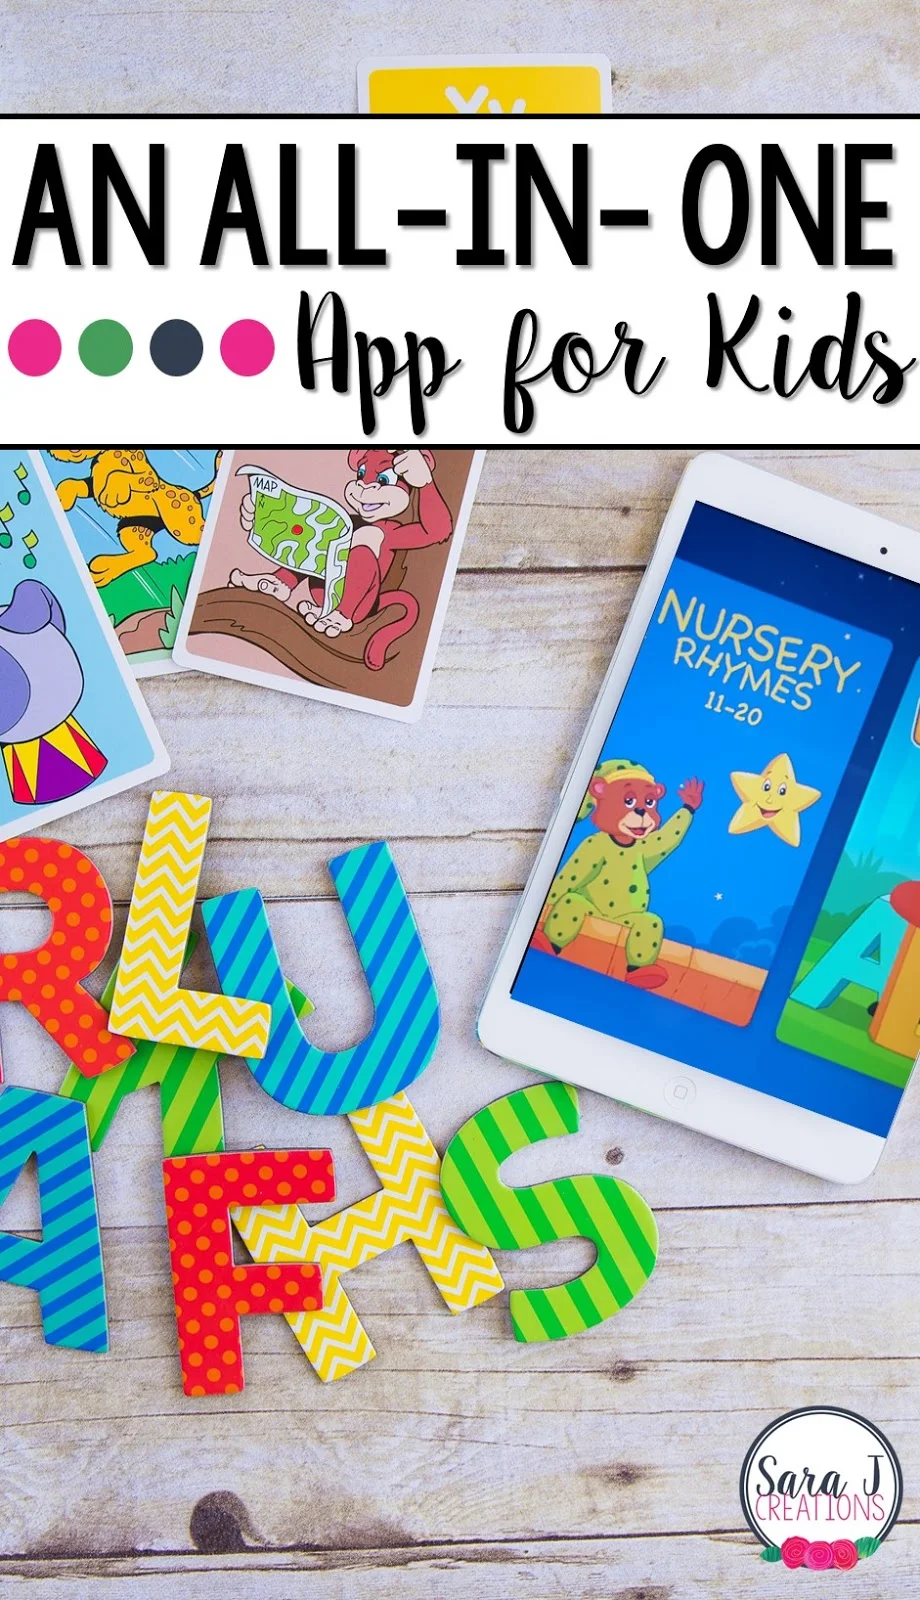 KidloLand is a fun app for toddlers and preschools that works on everything from counting to colors to letters to nursery rhymes and more.  